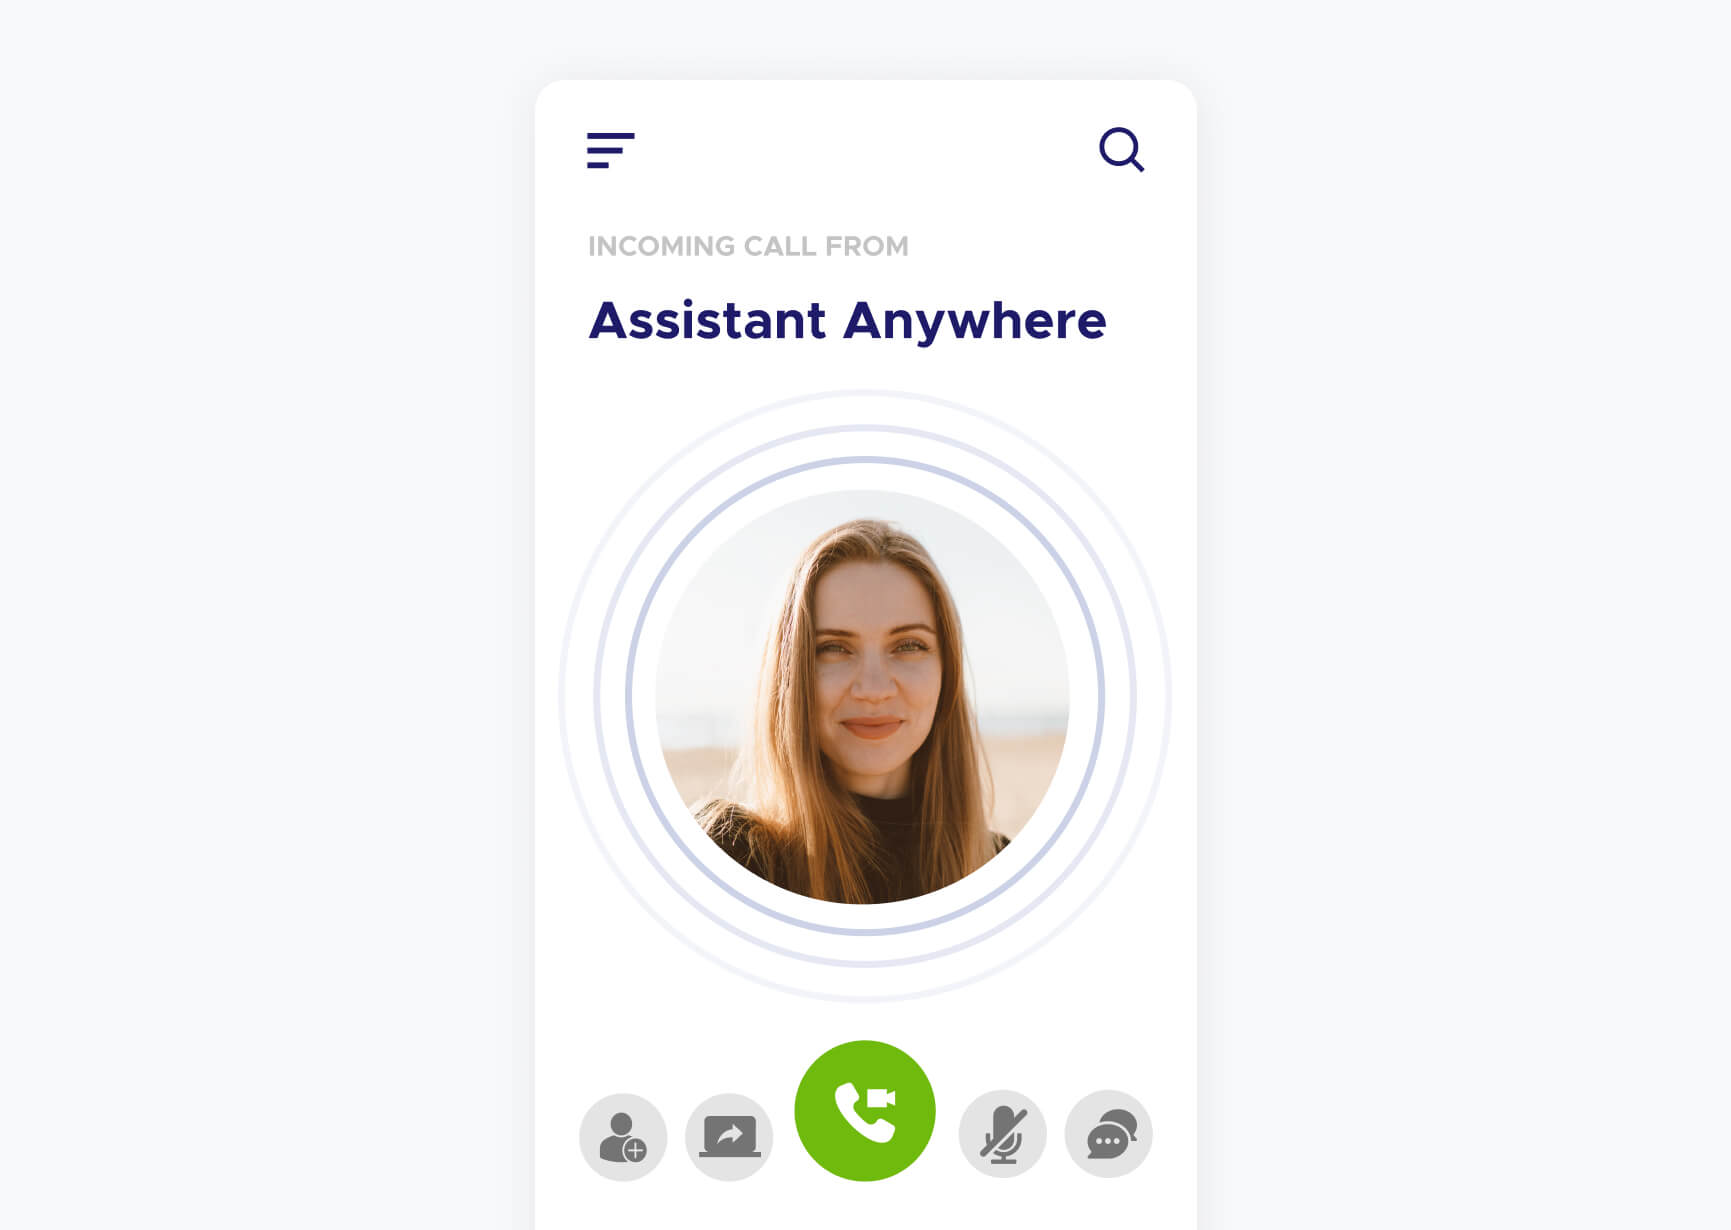 Simulation of a video call from the Assistant Anywhere application